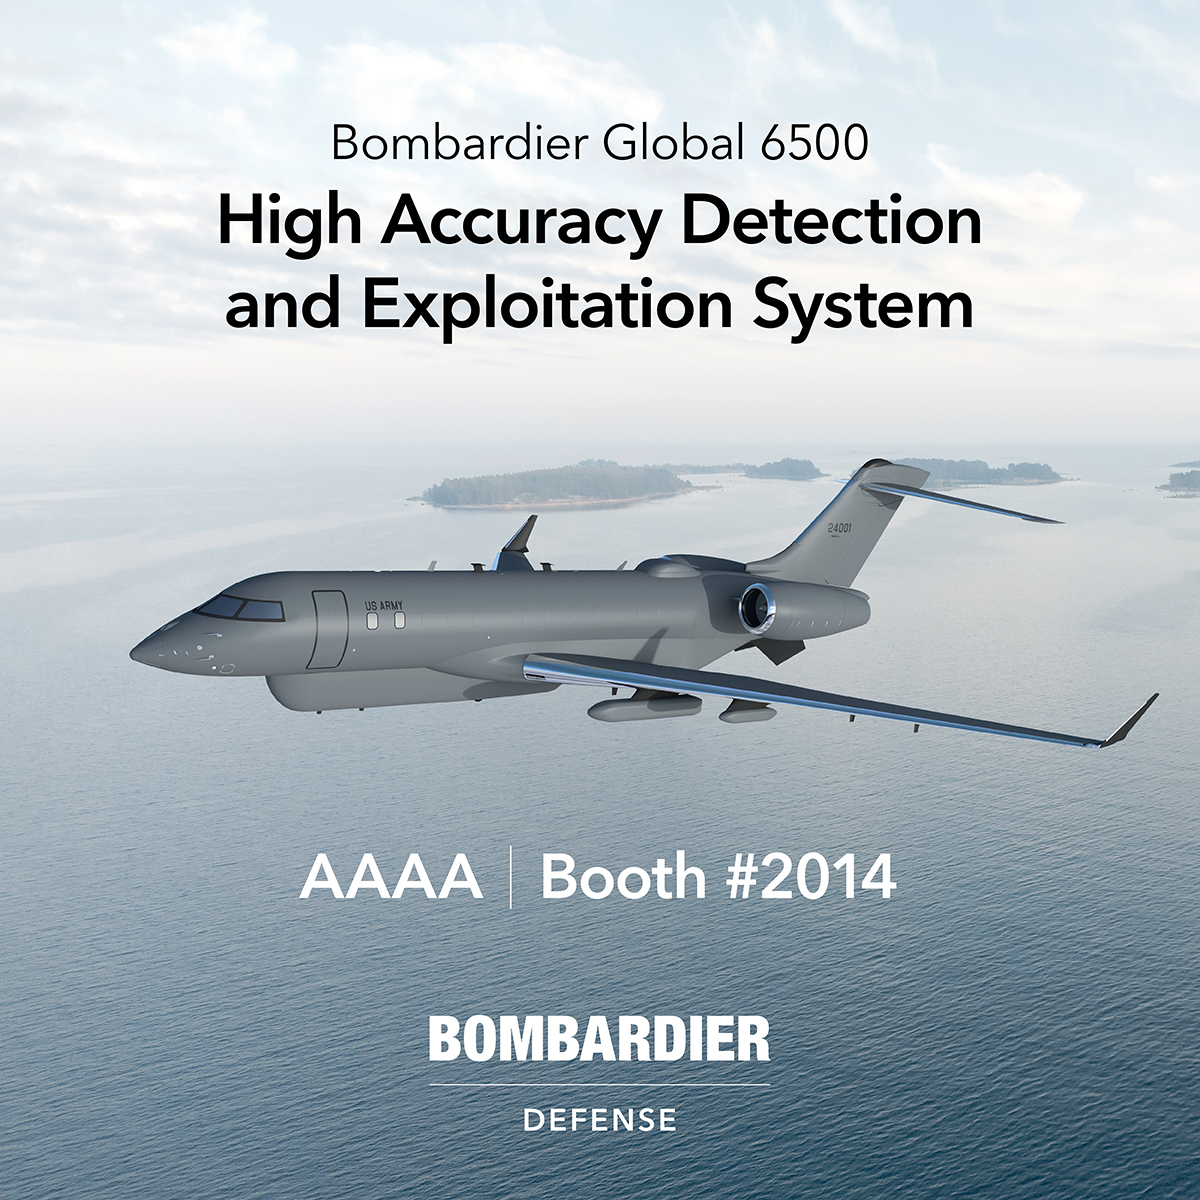 Come visit us April 24-26 as #BombardierDefense will be at the @Army_Aviation ’s #24Summit to showcase its defense solutions and their applications in various @USArmy missions.​ #Global6500

More details here: bit.ly/446lSiJ